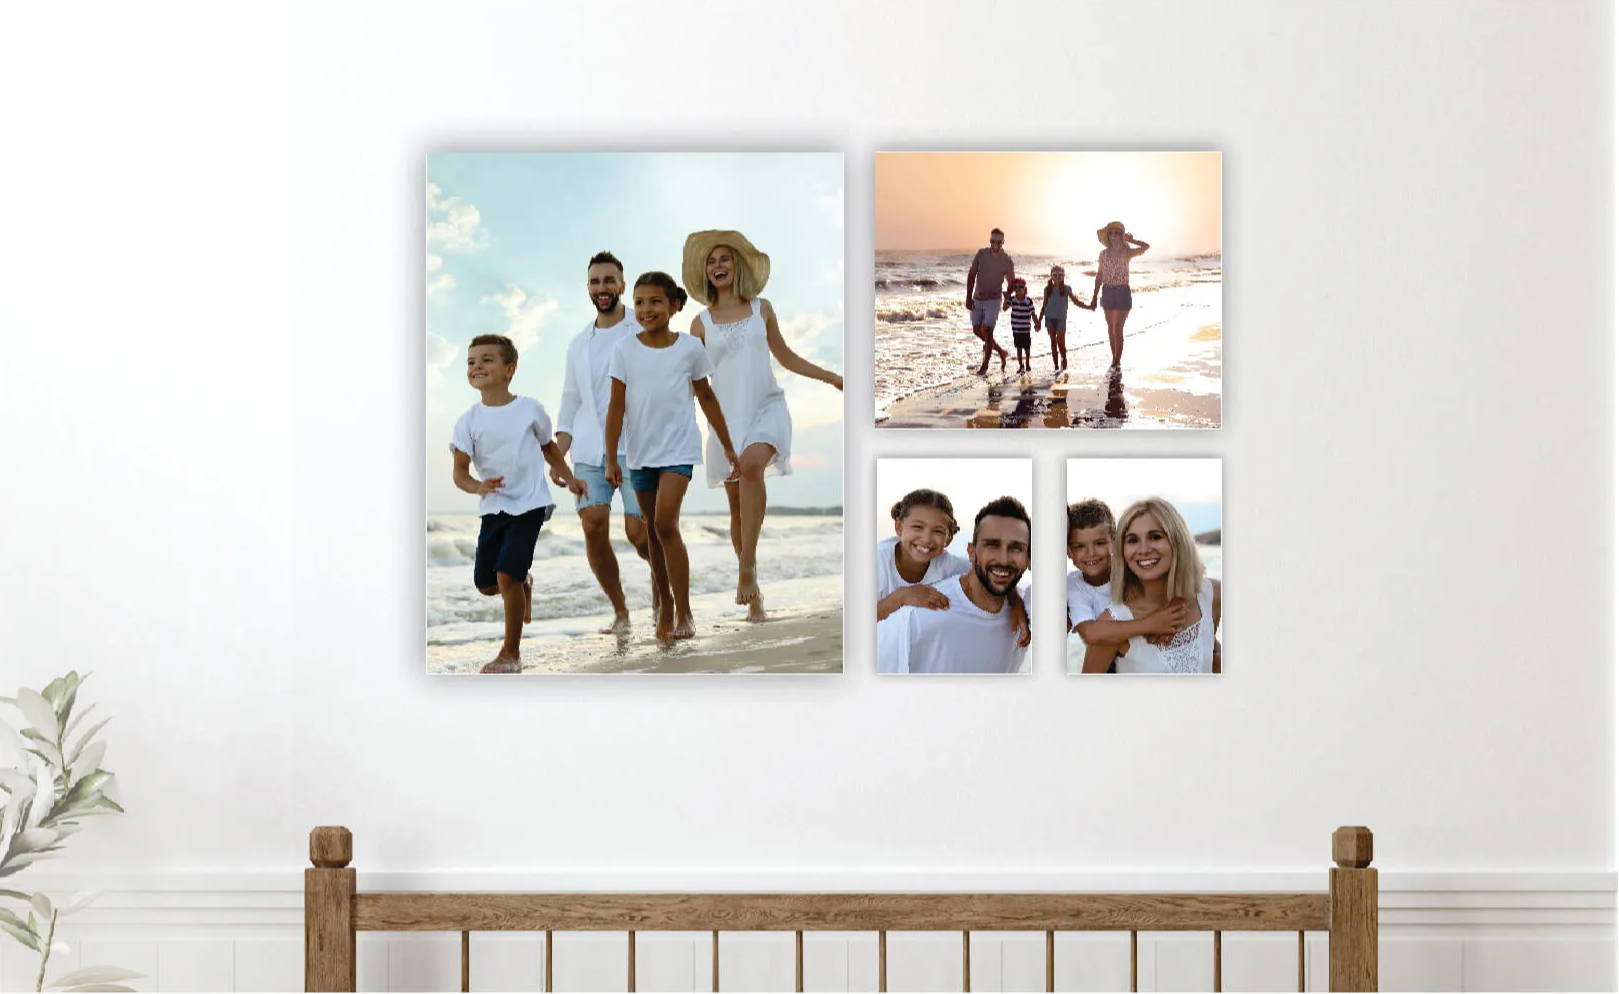 Display Frames, Cases & More | Perfect Cases and Frames